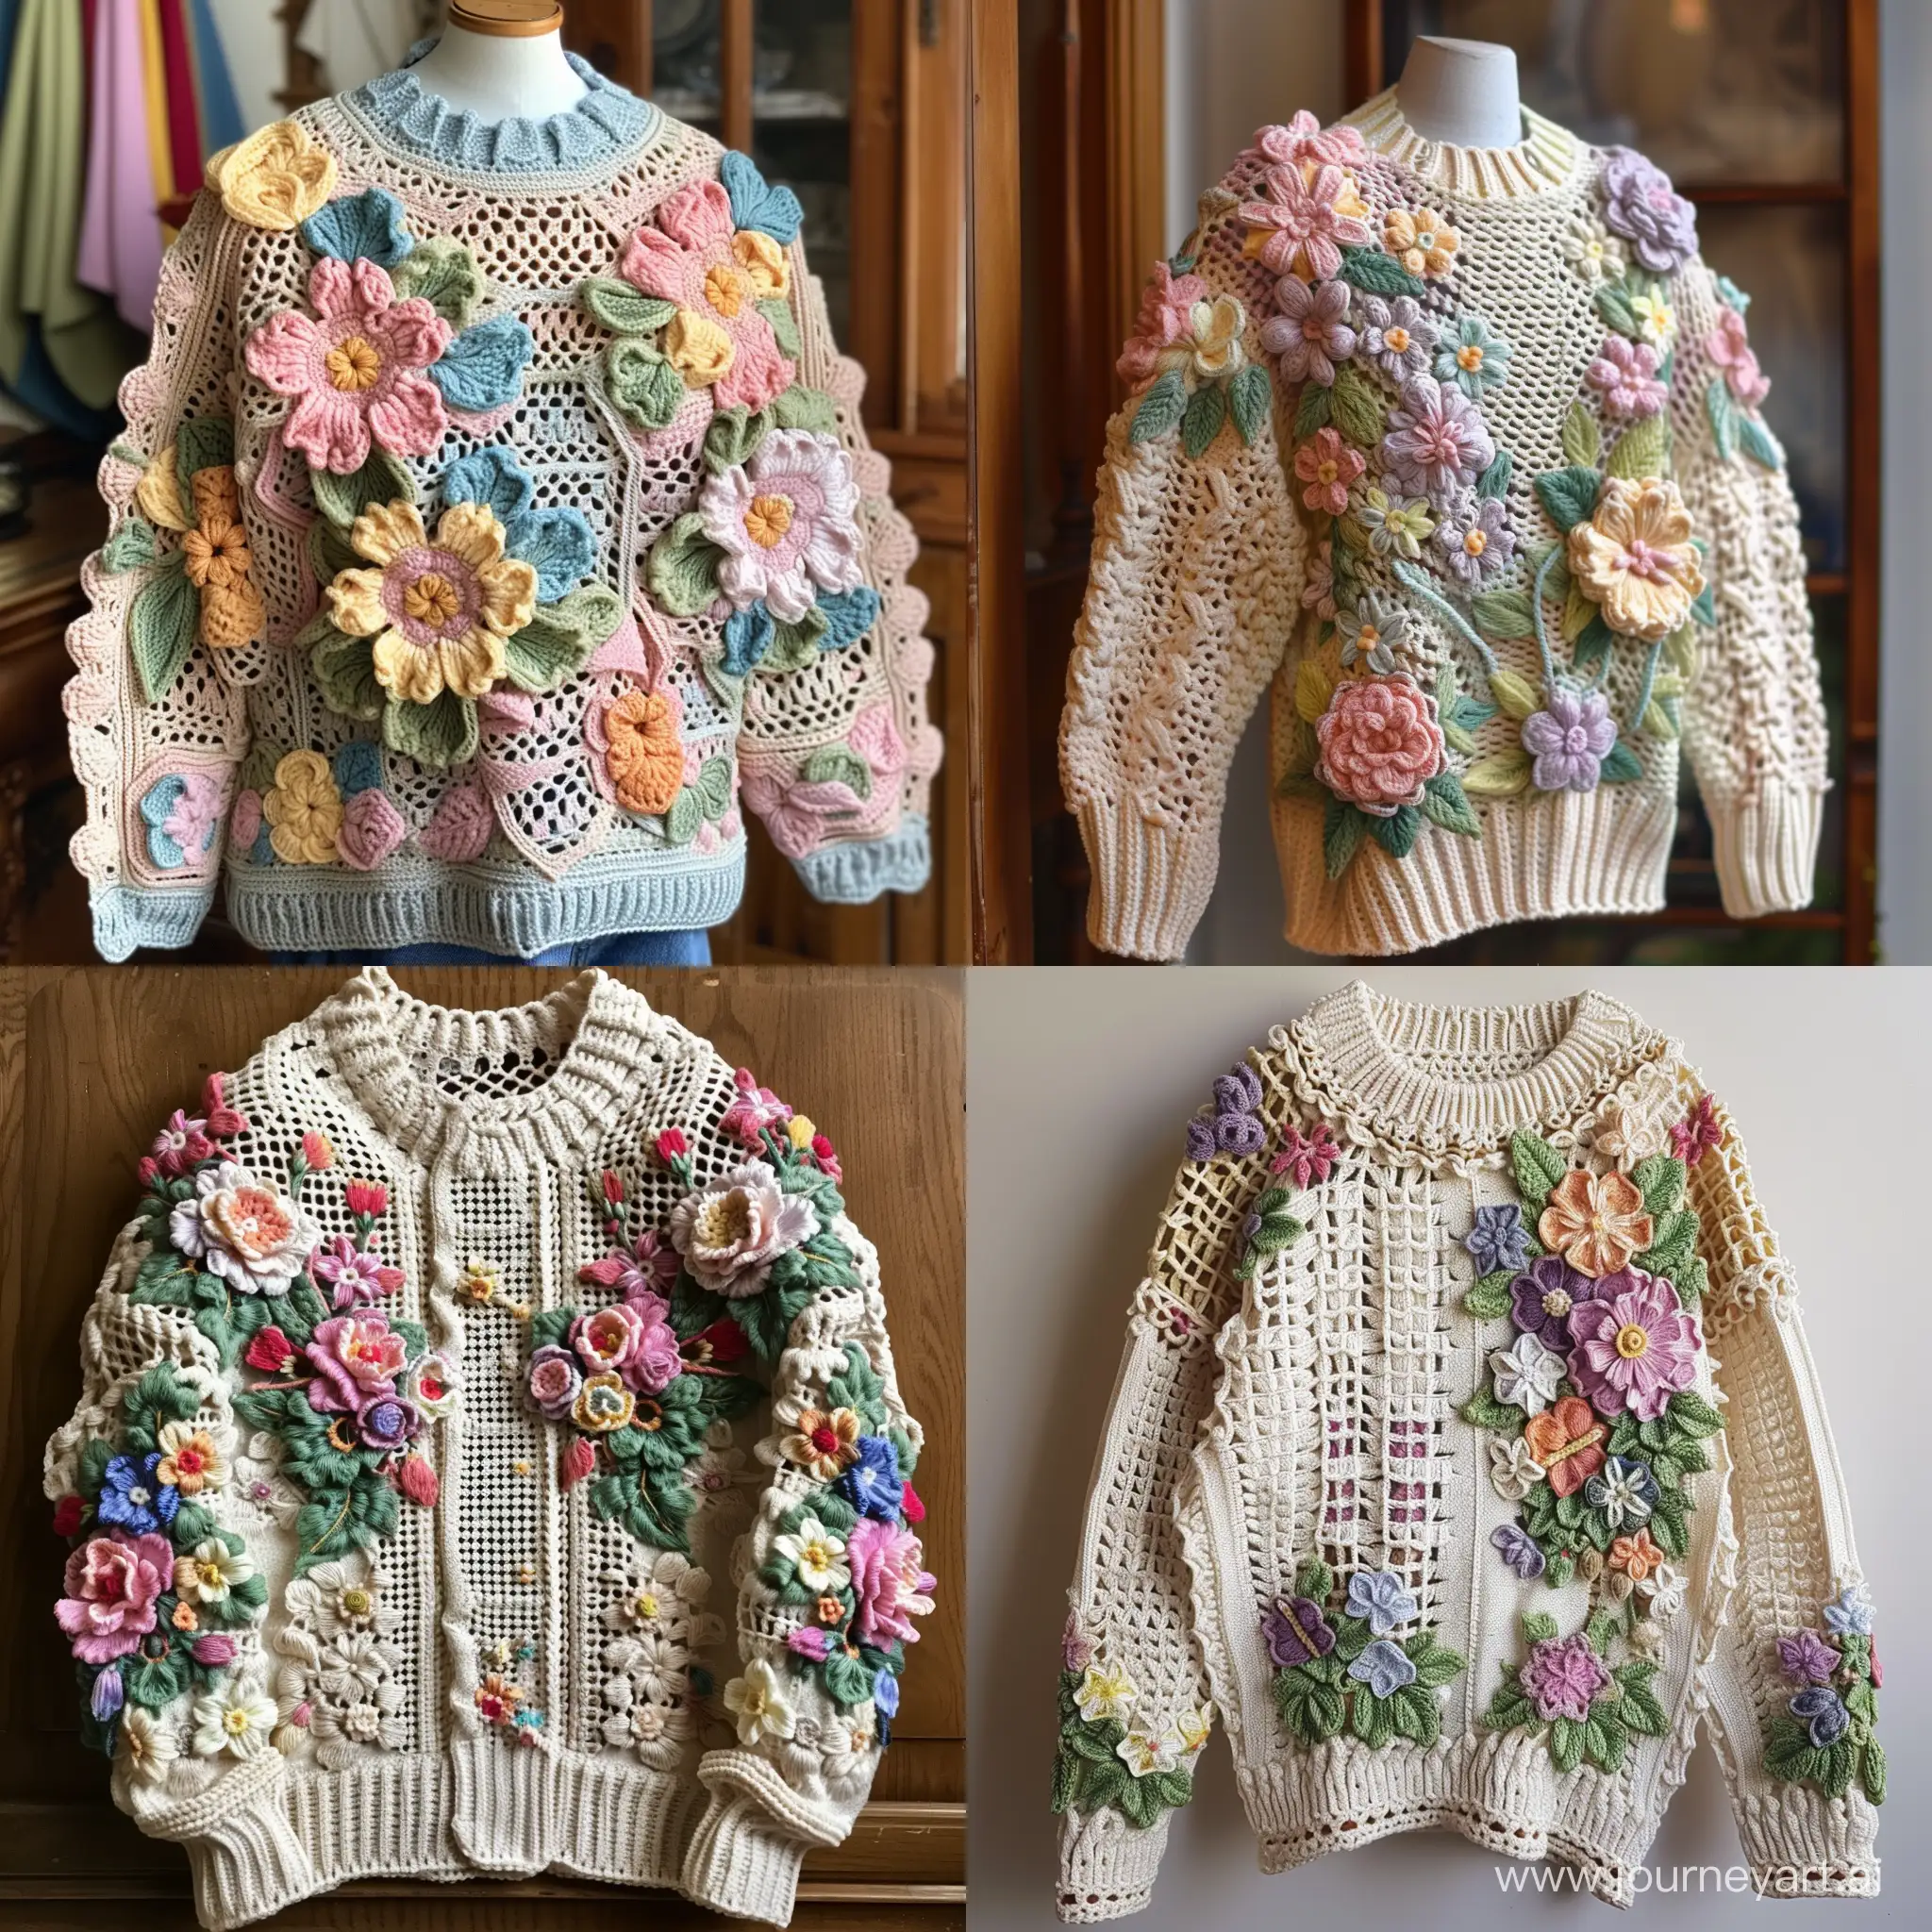 Elegant-Crocheted-Irish-Lace-Pullover-with-Floral-Motifs-in-Delicate-Pastel-Colors